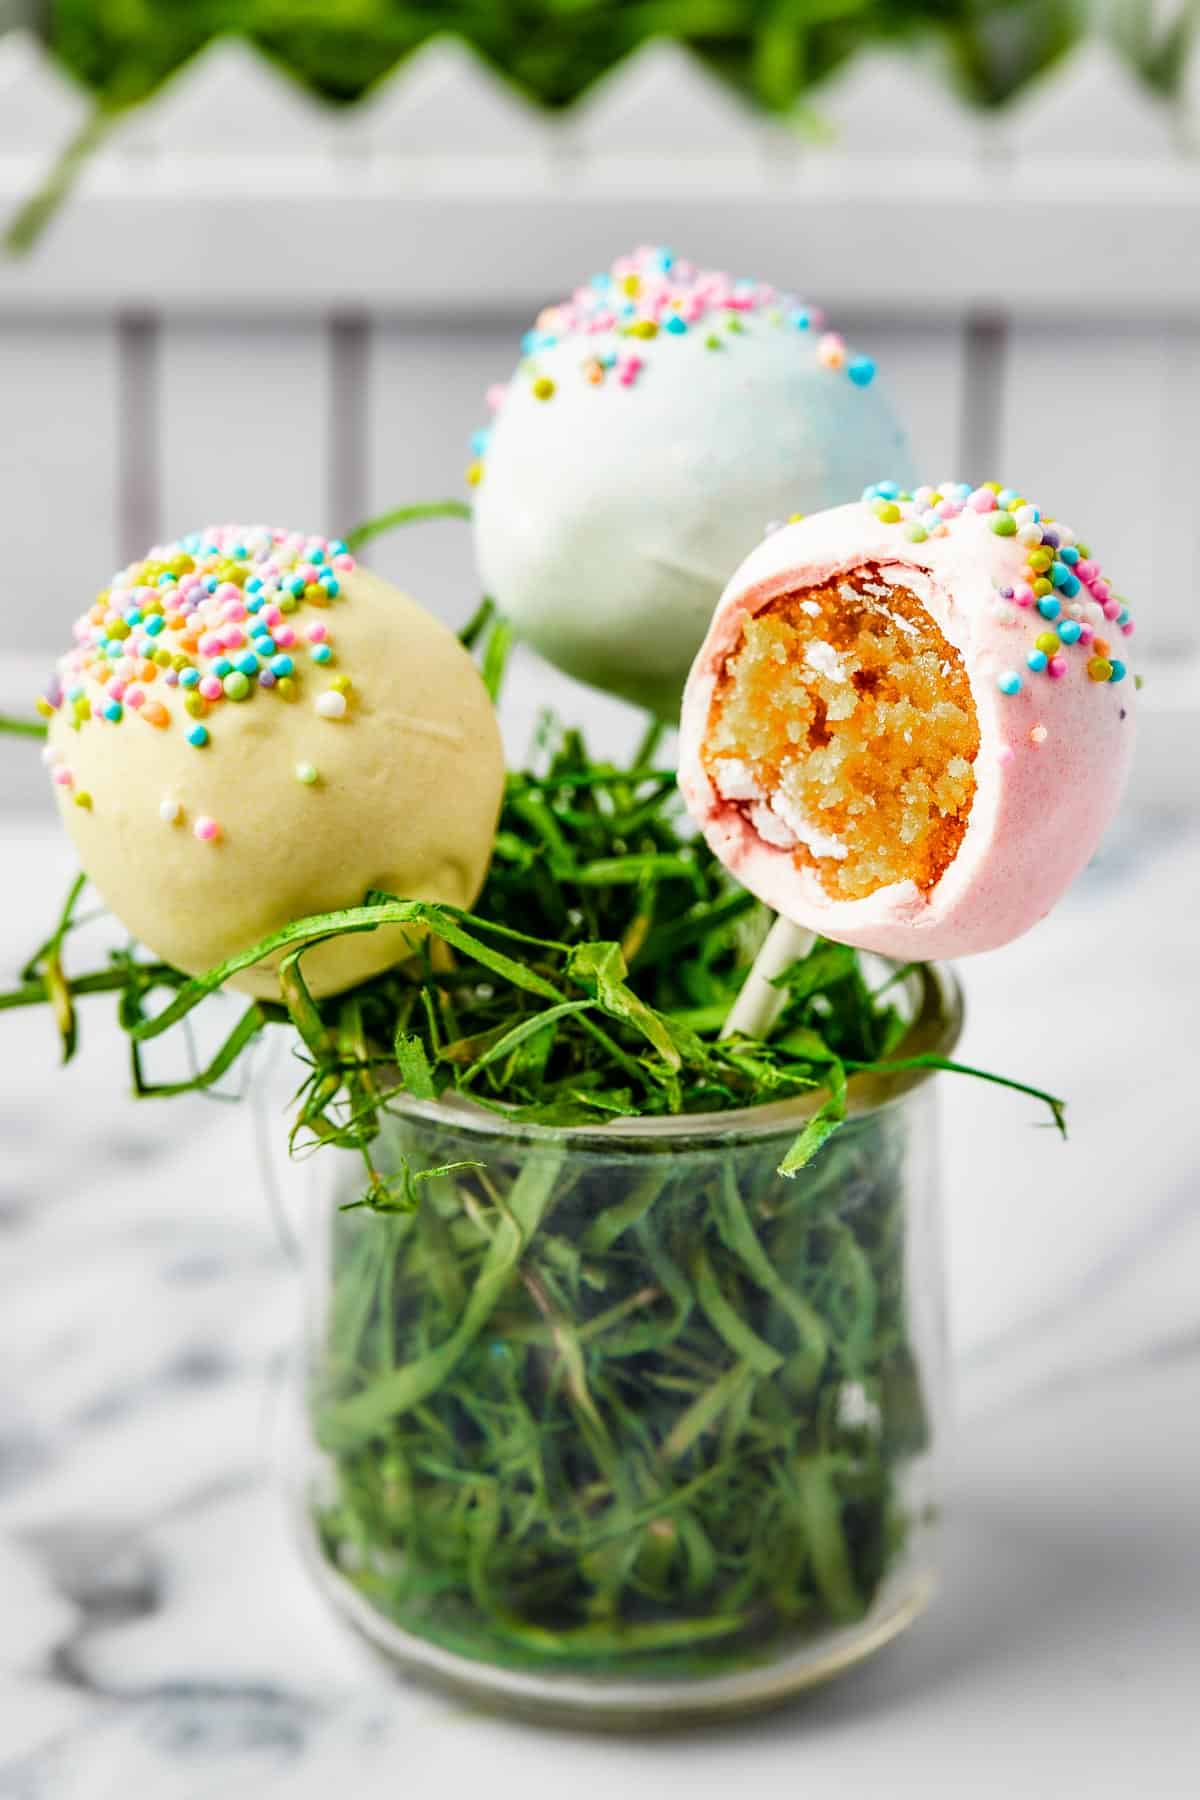 Three cake lollipops in a small glass filled with Easter grass. One of the lollipops has had a bite taken out of it.